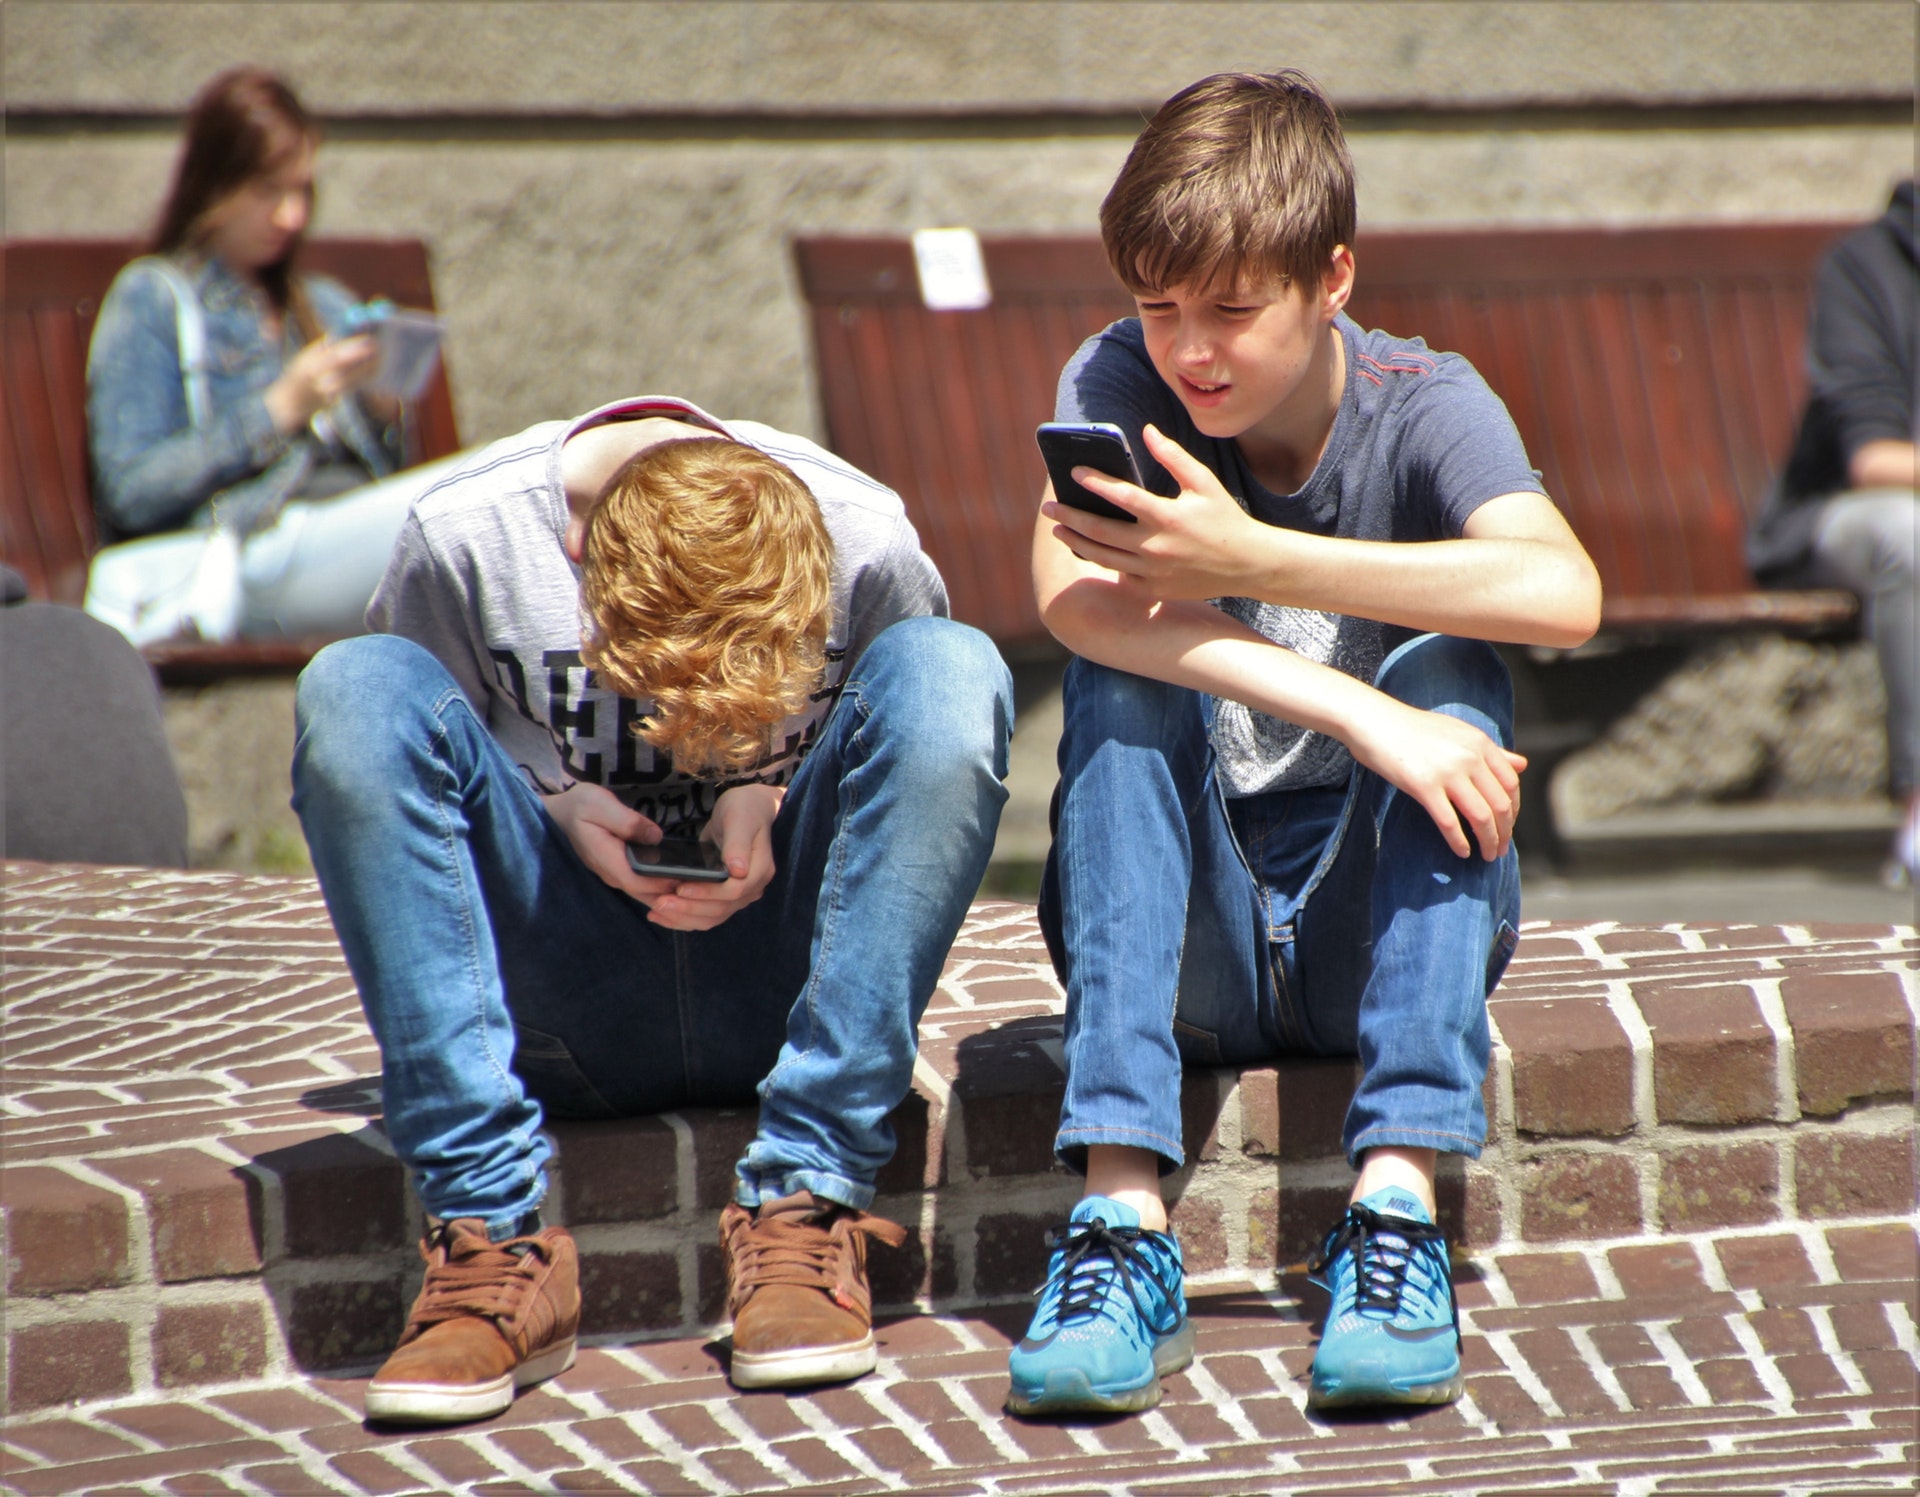 Kids & Technology: When To Limit It & How